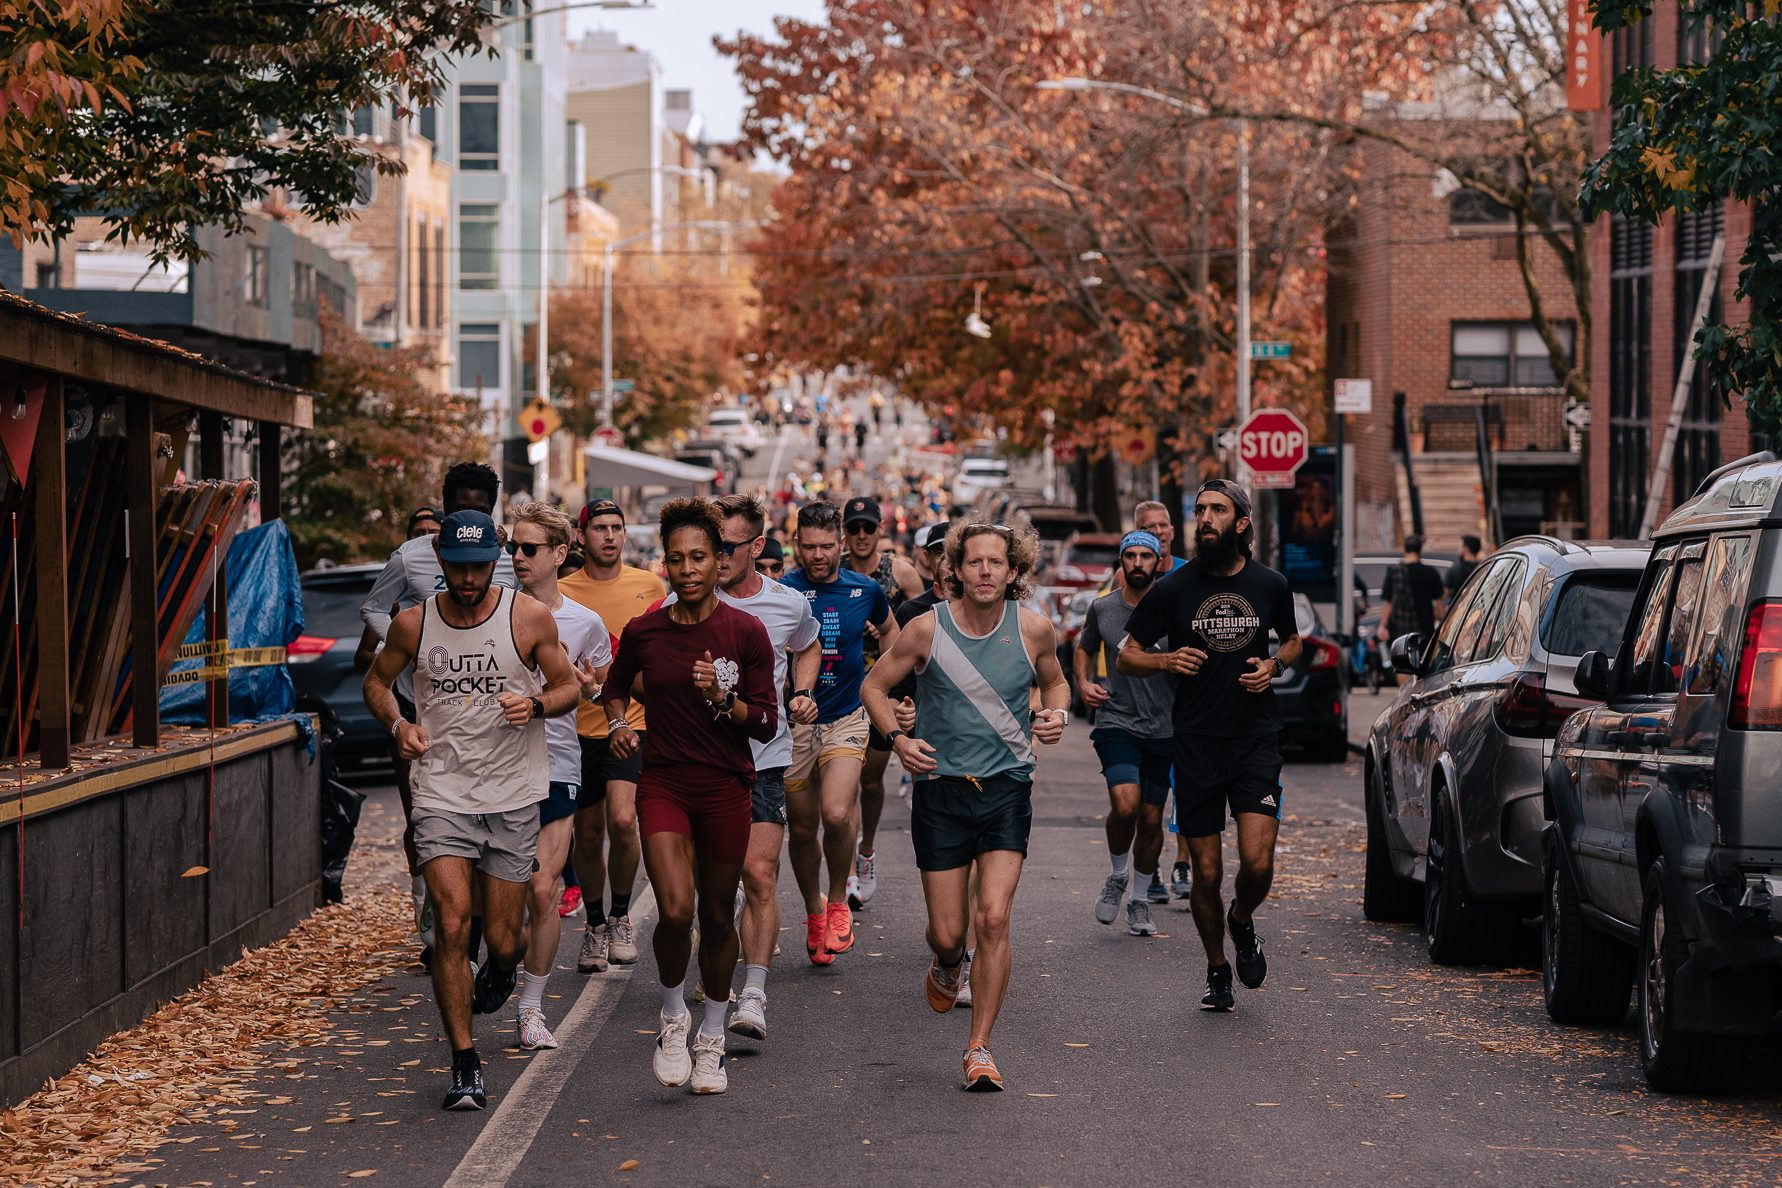 Tracksmith runners hit the streets before the NYC marathon.